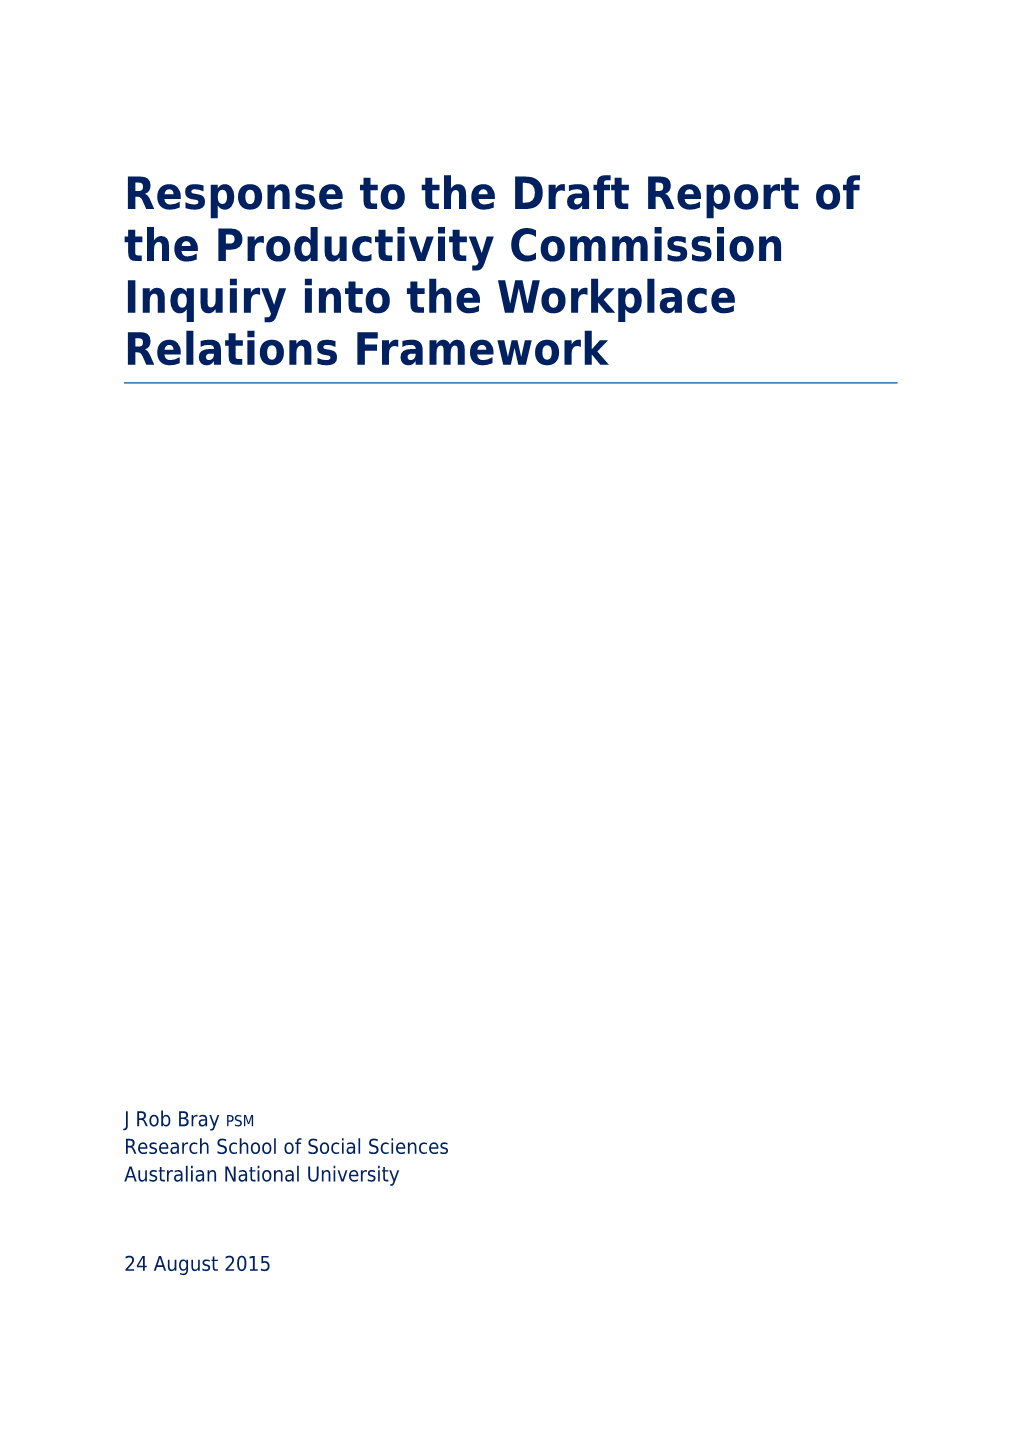 Submission DR261 - J Rob Bray - Workplace Relations Framework - Public Inquiry